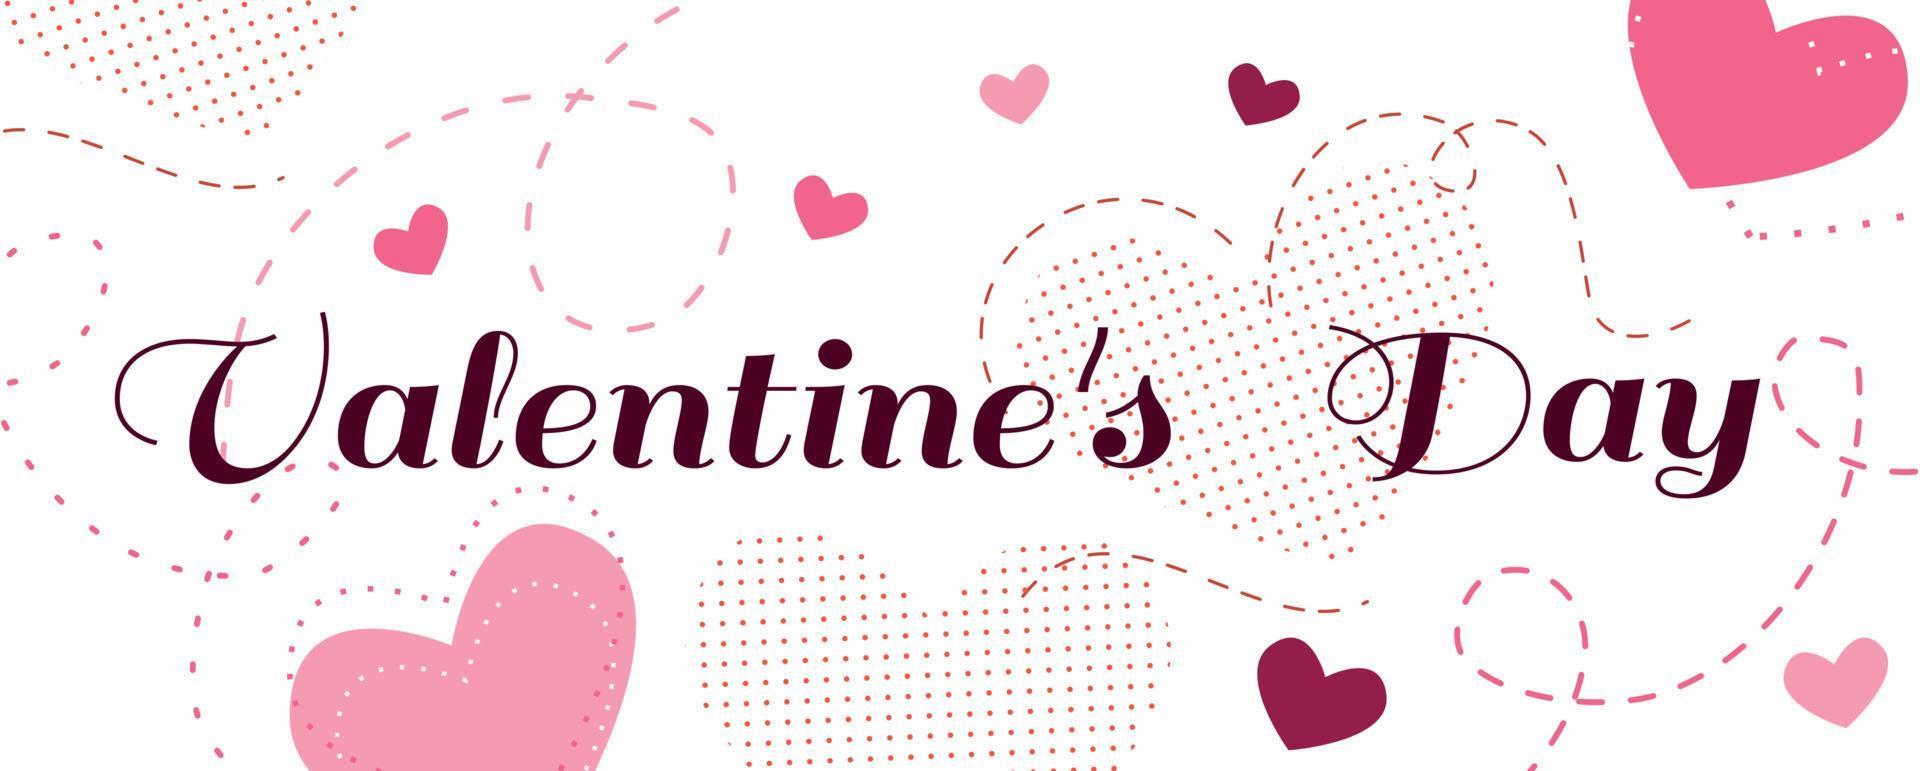 Valentine's day background with hearts vector